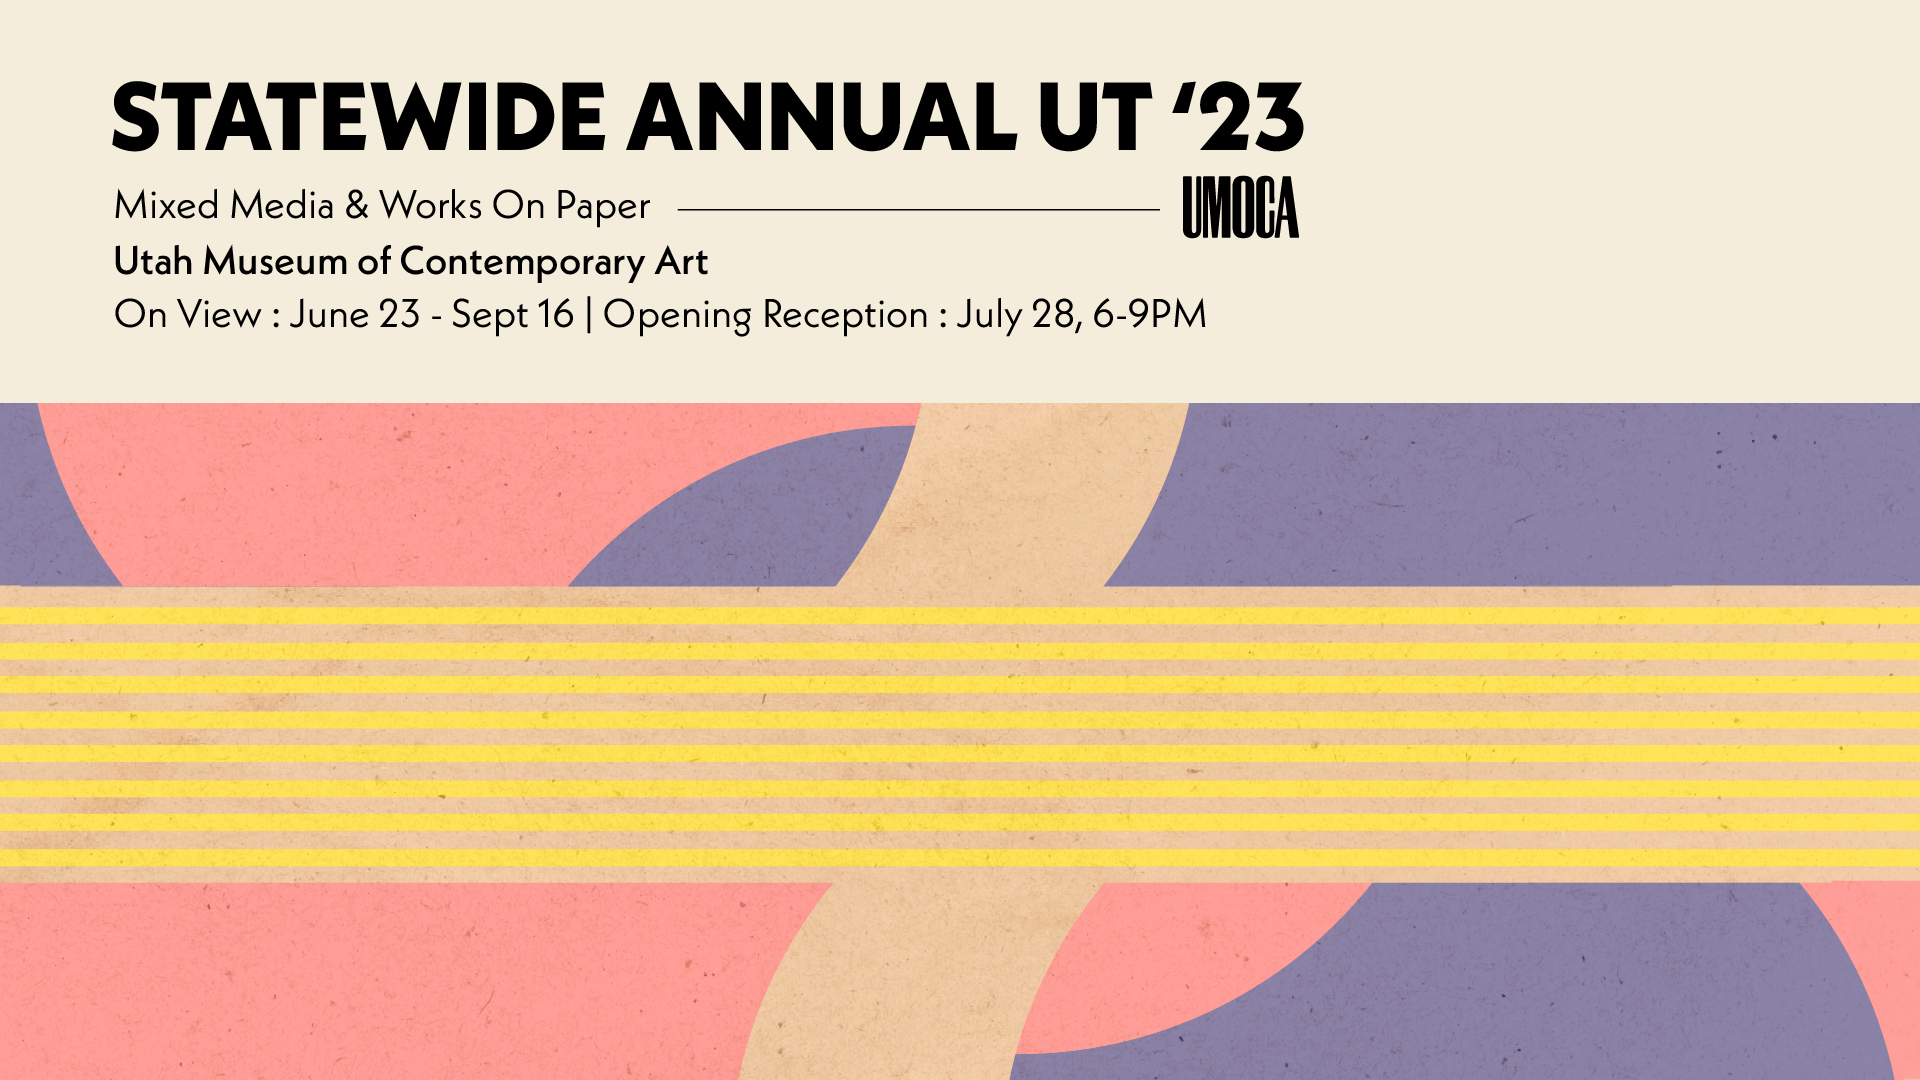 Statewide Annual UT '23. Mixed media and works on paper. Utah Division of Arts and Museums. Utah Museum of Contemporary Art. On view: June 23 - Sept. 16. Artist reception: July 28, 6 to 9 p.m.